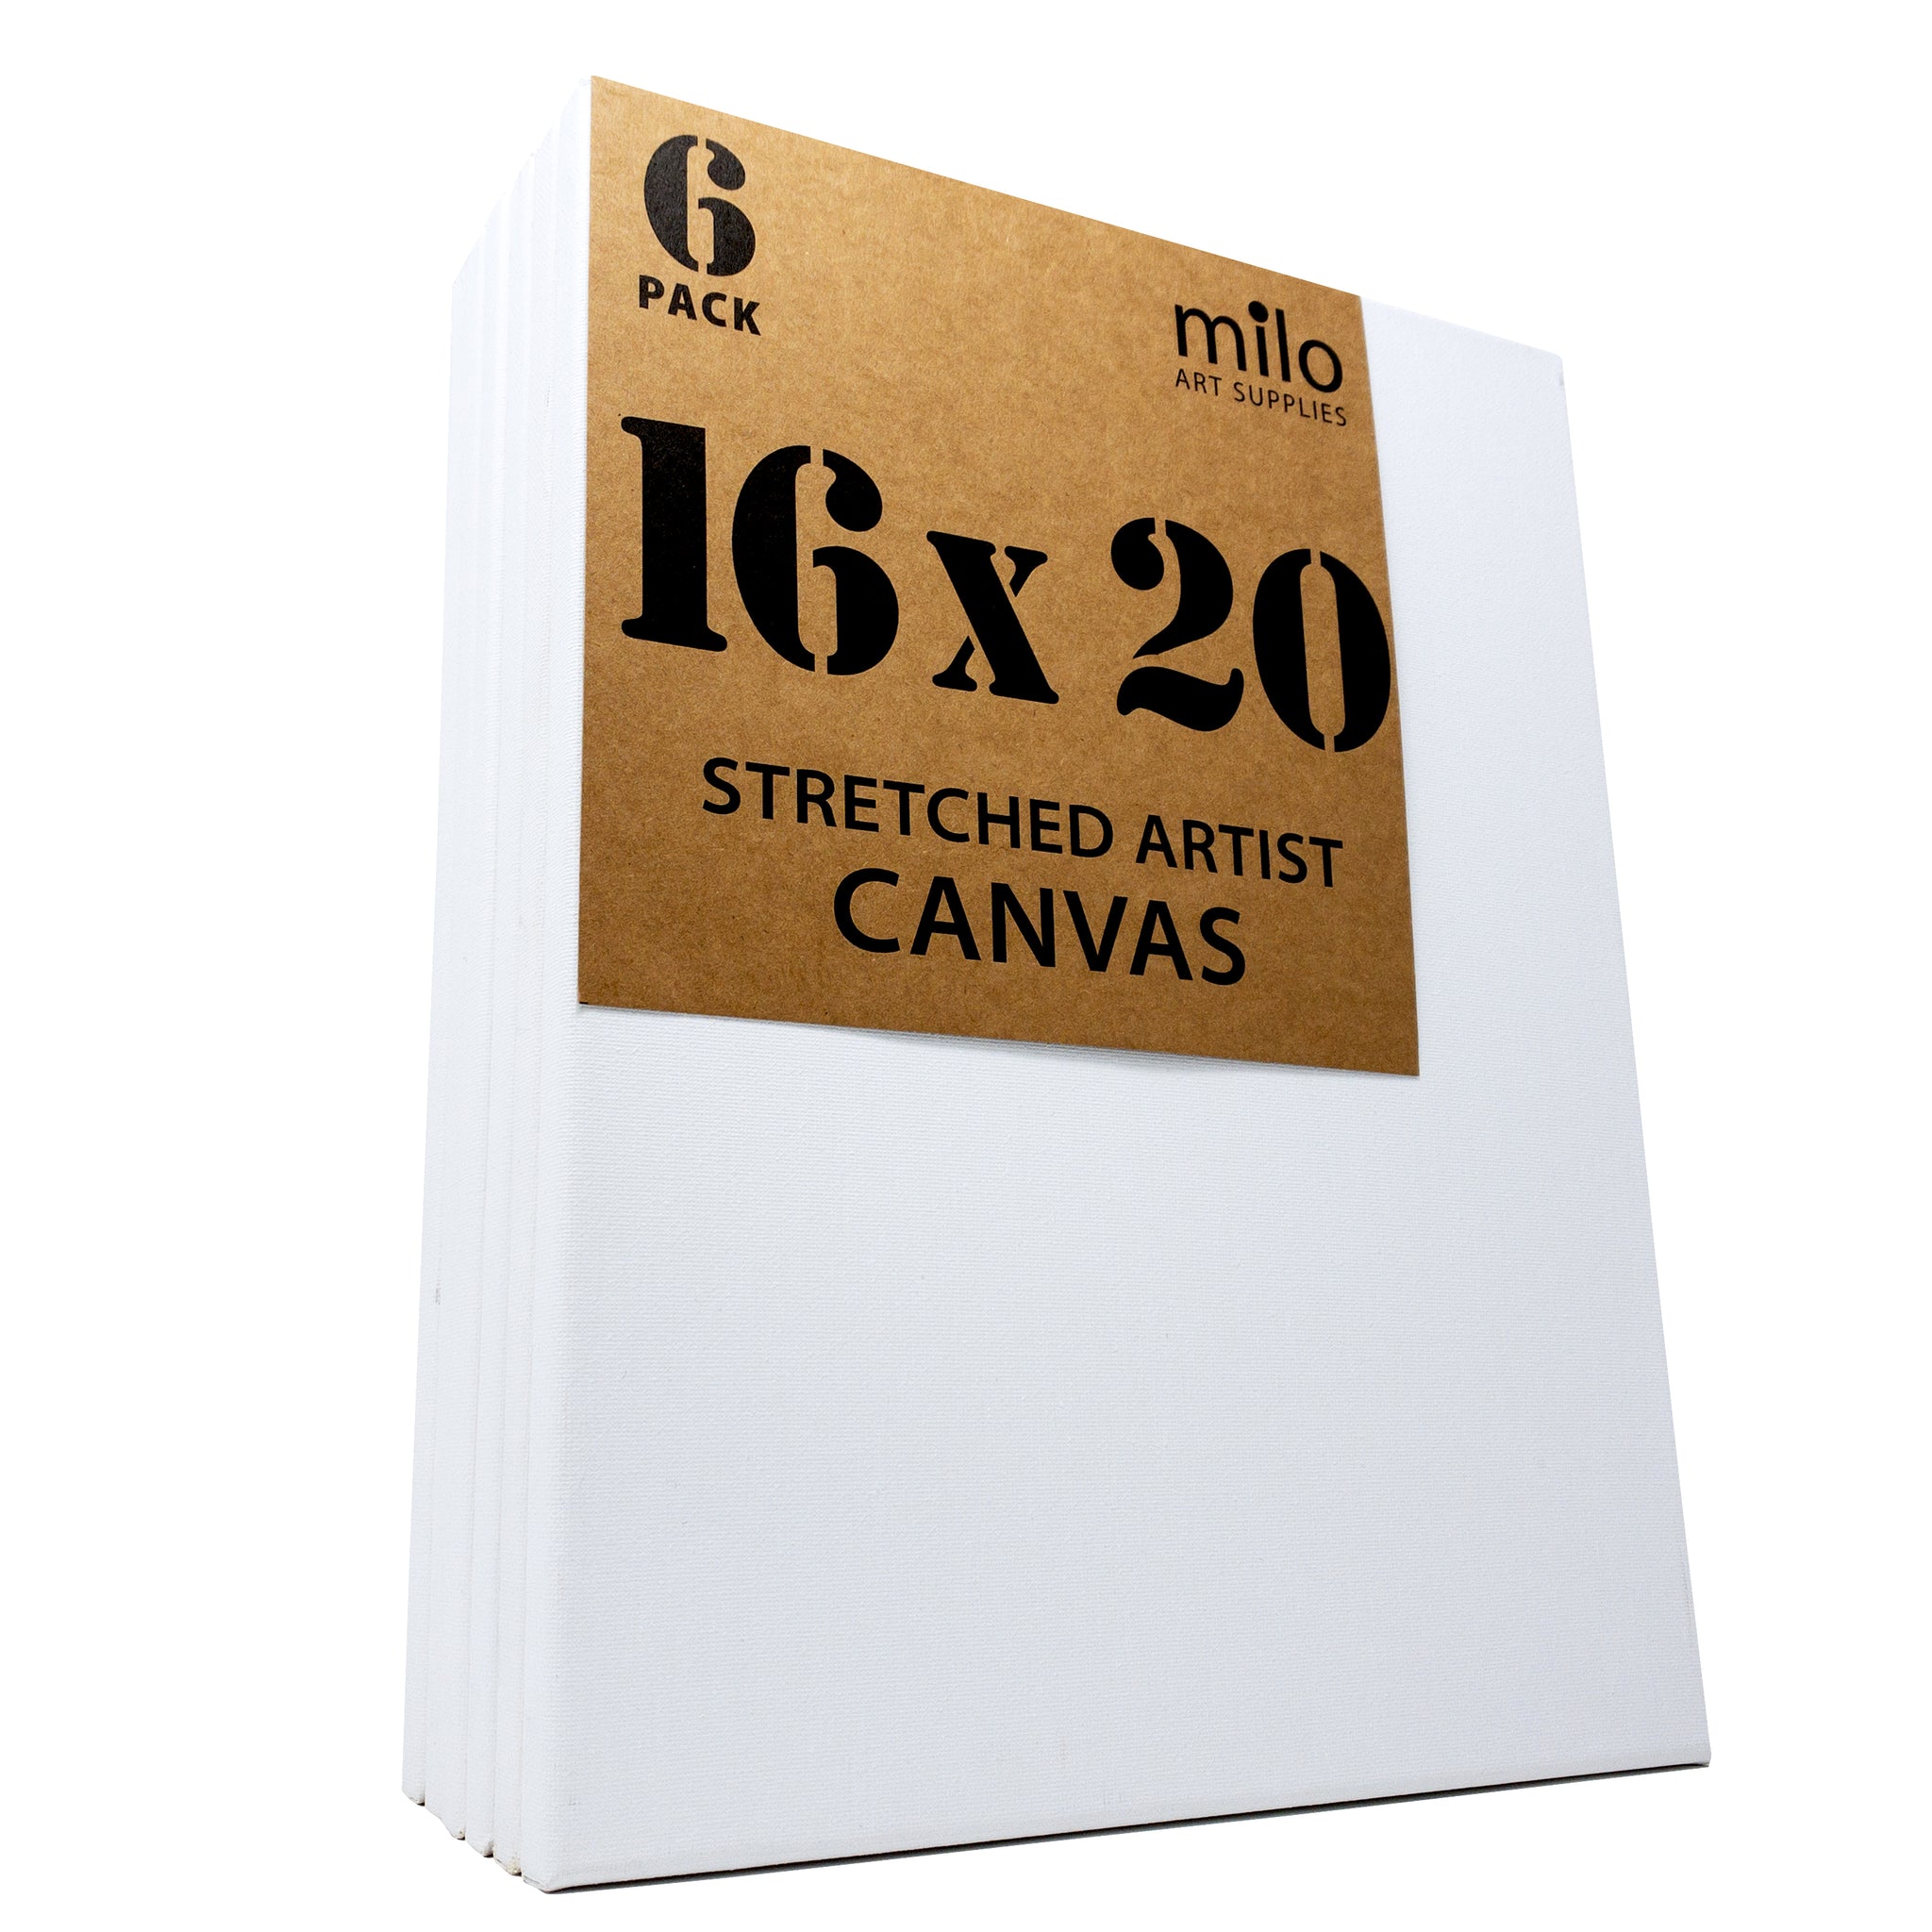 milo Stretched Artist Canvas, 60 x72 inches, 2 Pack, 1.5” inch Thick  Gallery Profile